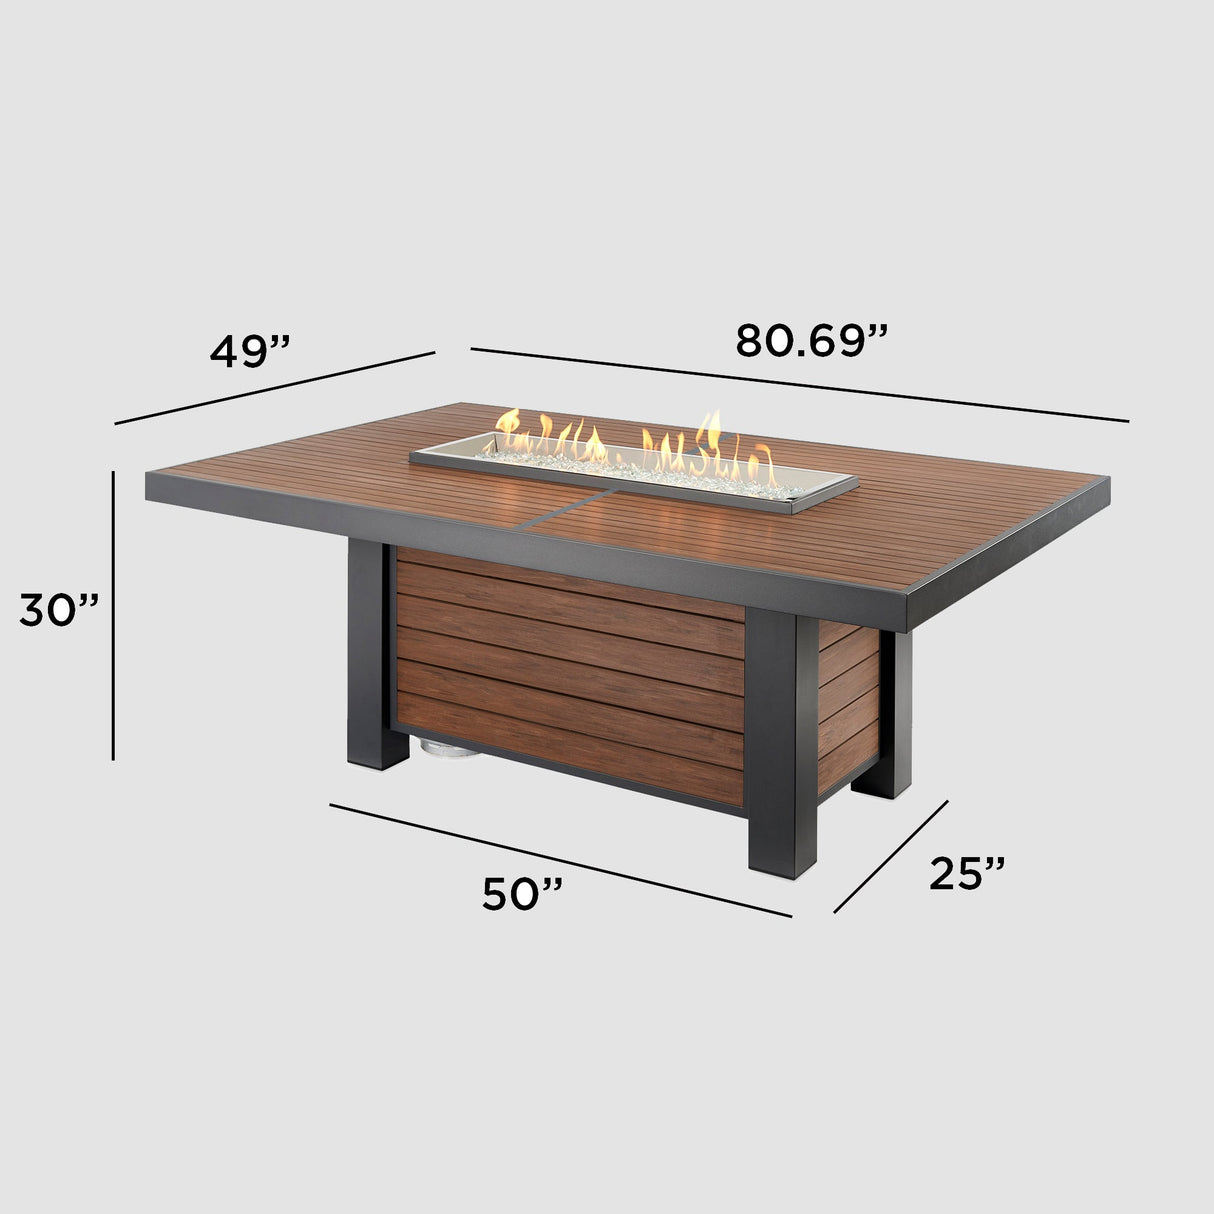 A Kenwood Linear Dining Height Gas Fire Pit Table with flame and dimensions